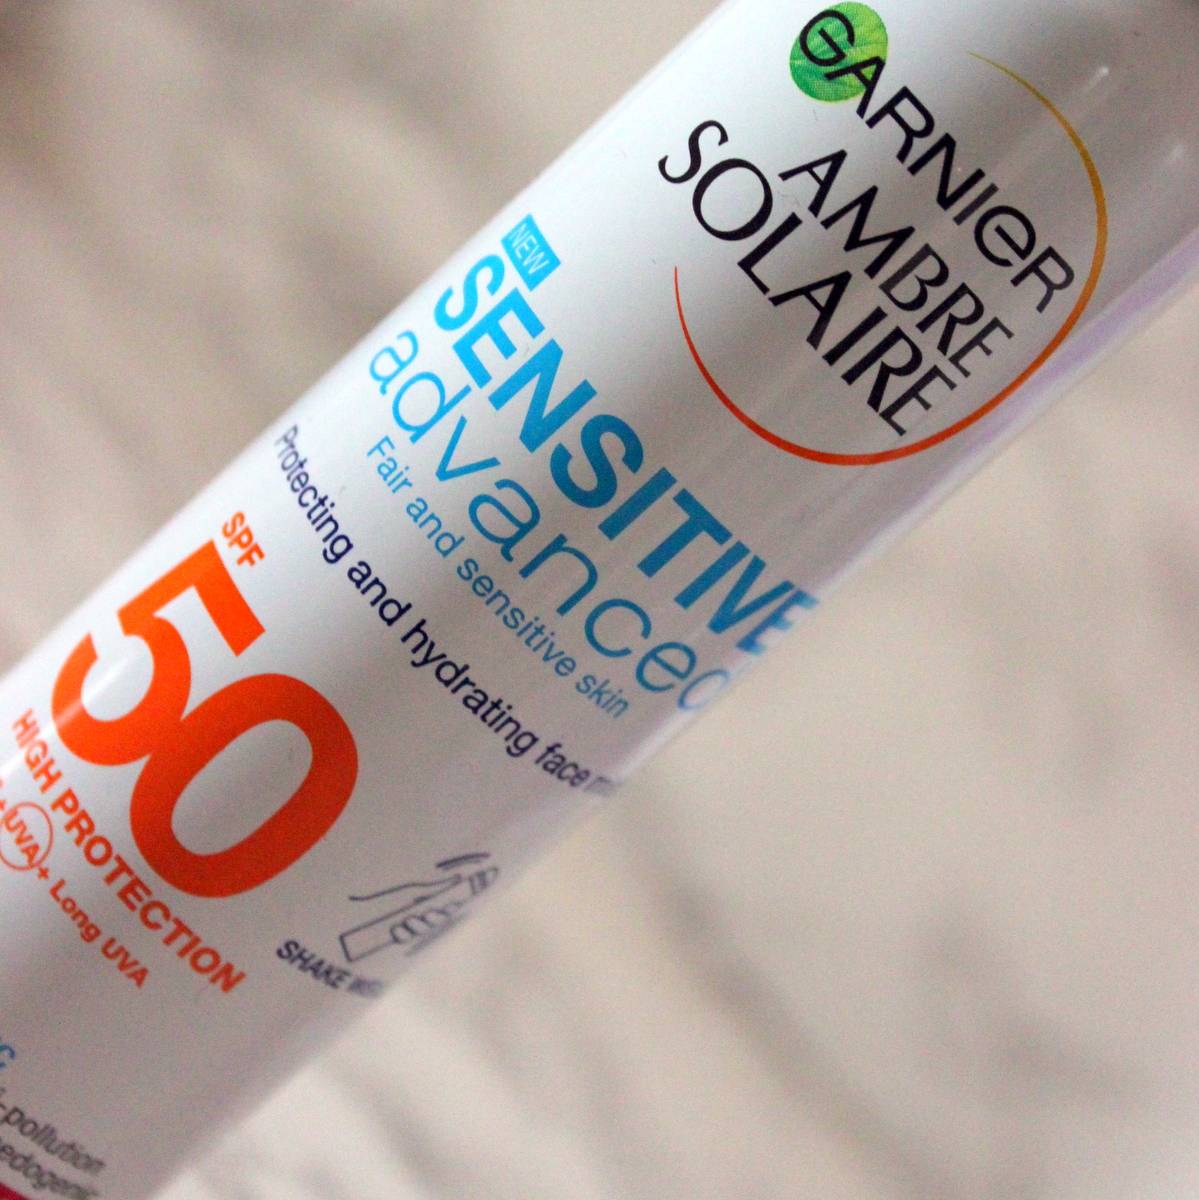 Garnier Ambre Solaire Sensitive Advanced Protecting and Hydrating Face Mist